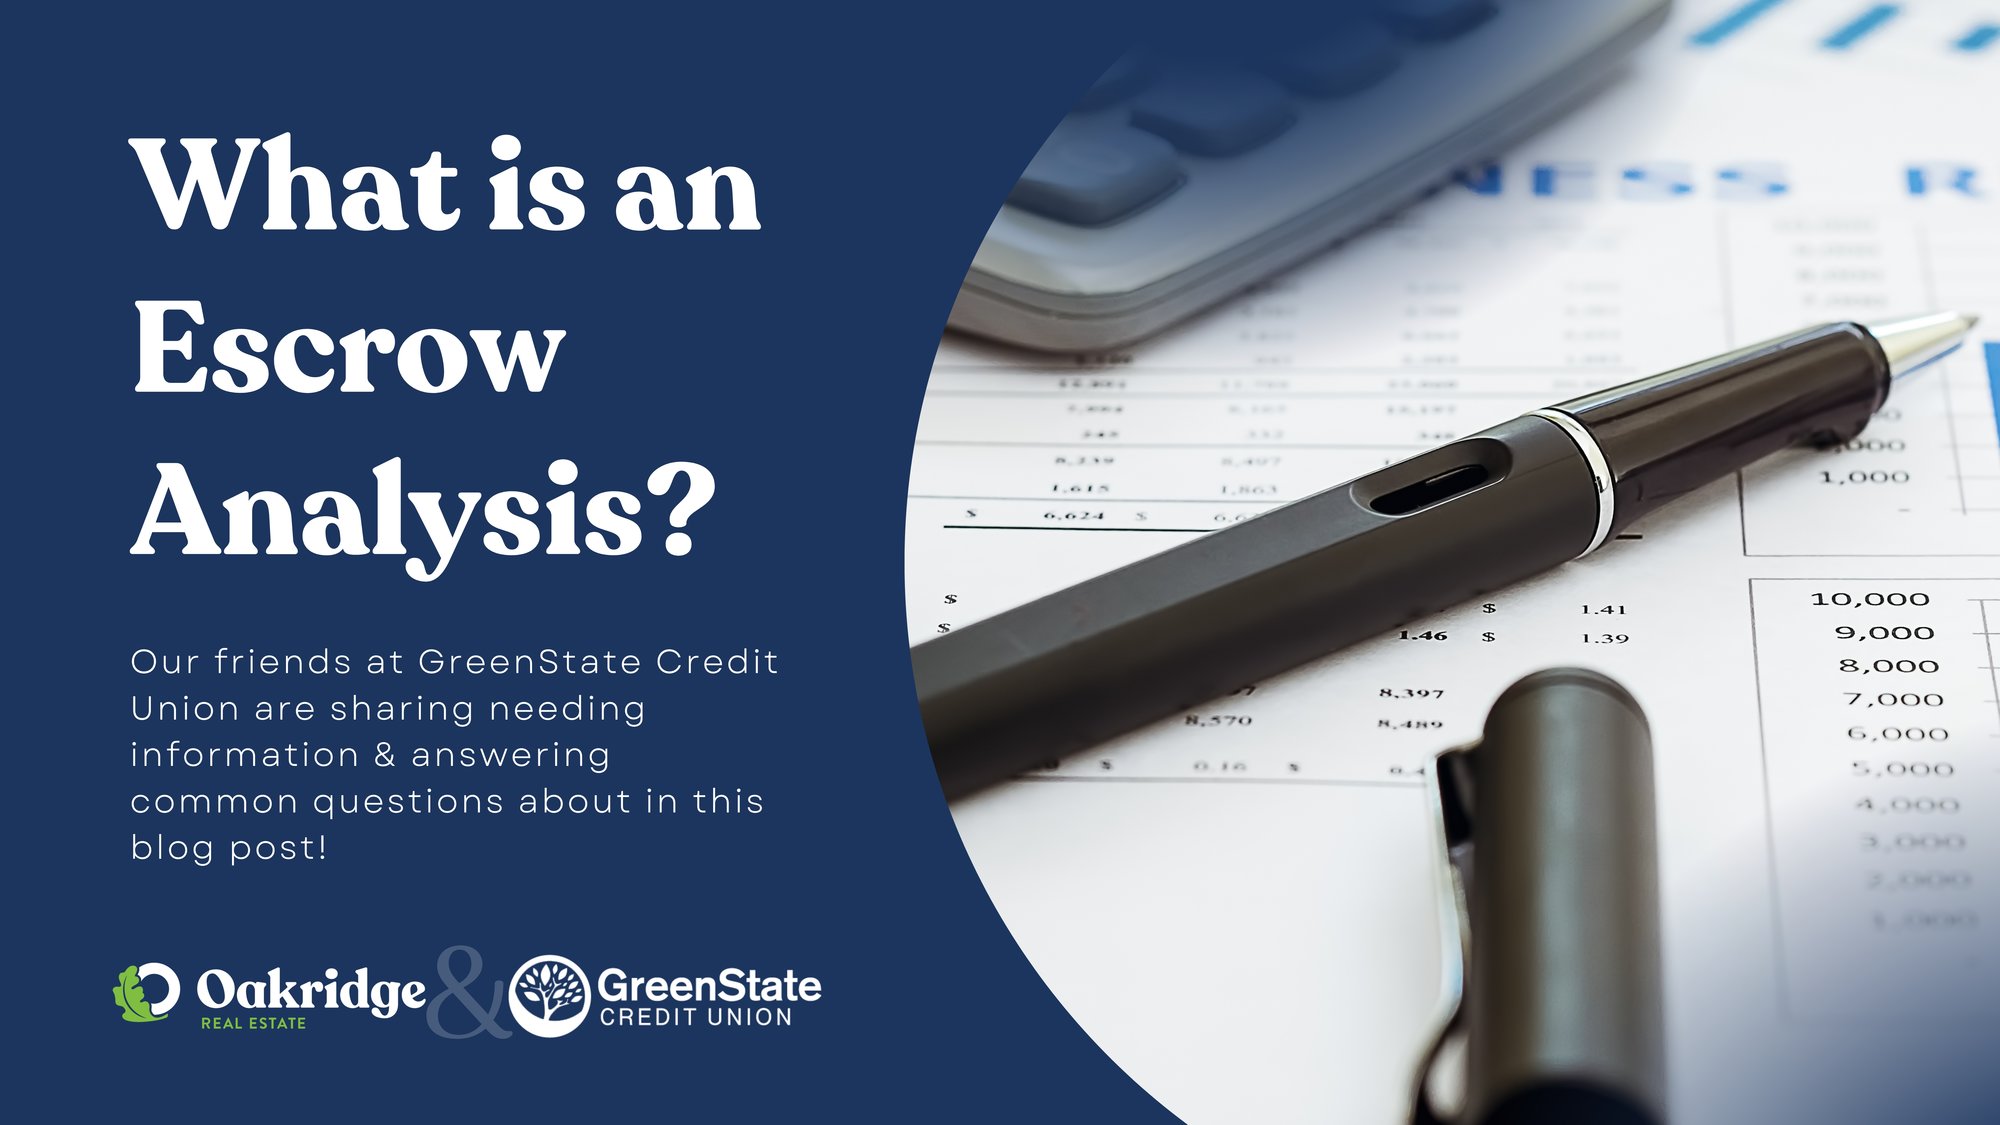 What is an Escrow Analysis? Greenstate Credit Union & Oakridge Real Estate